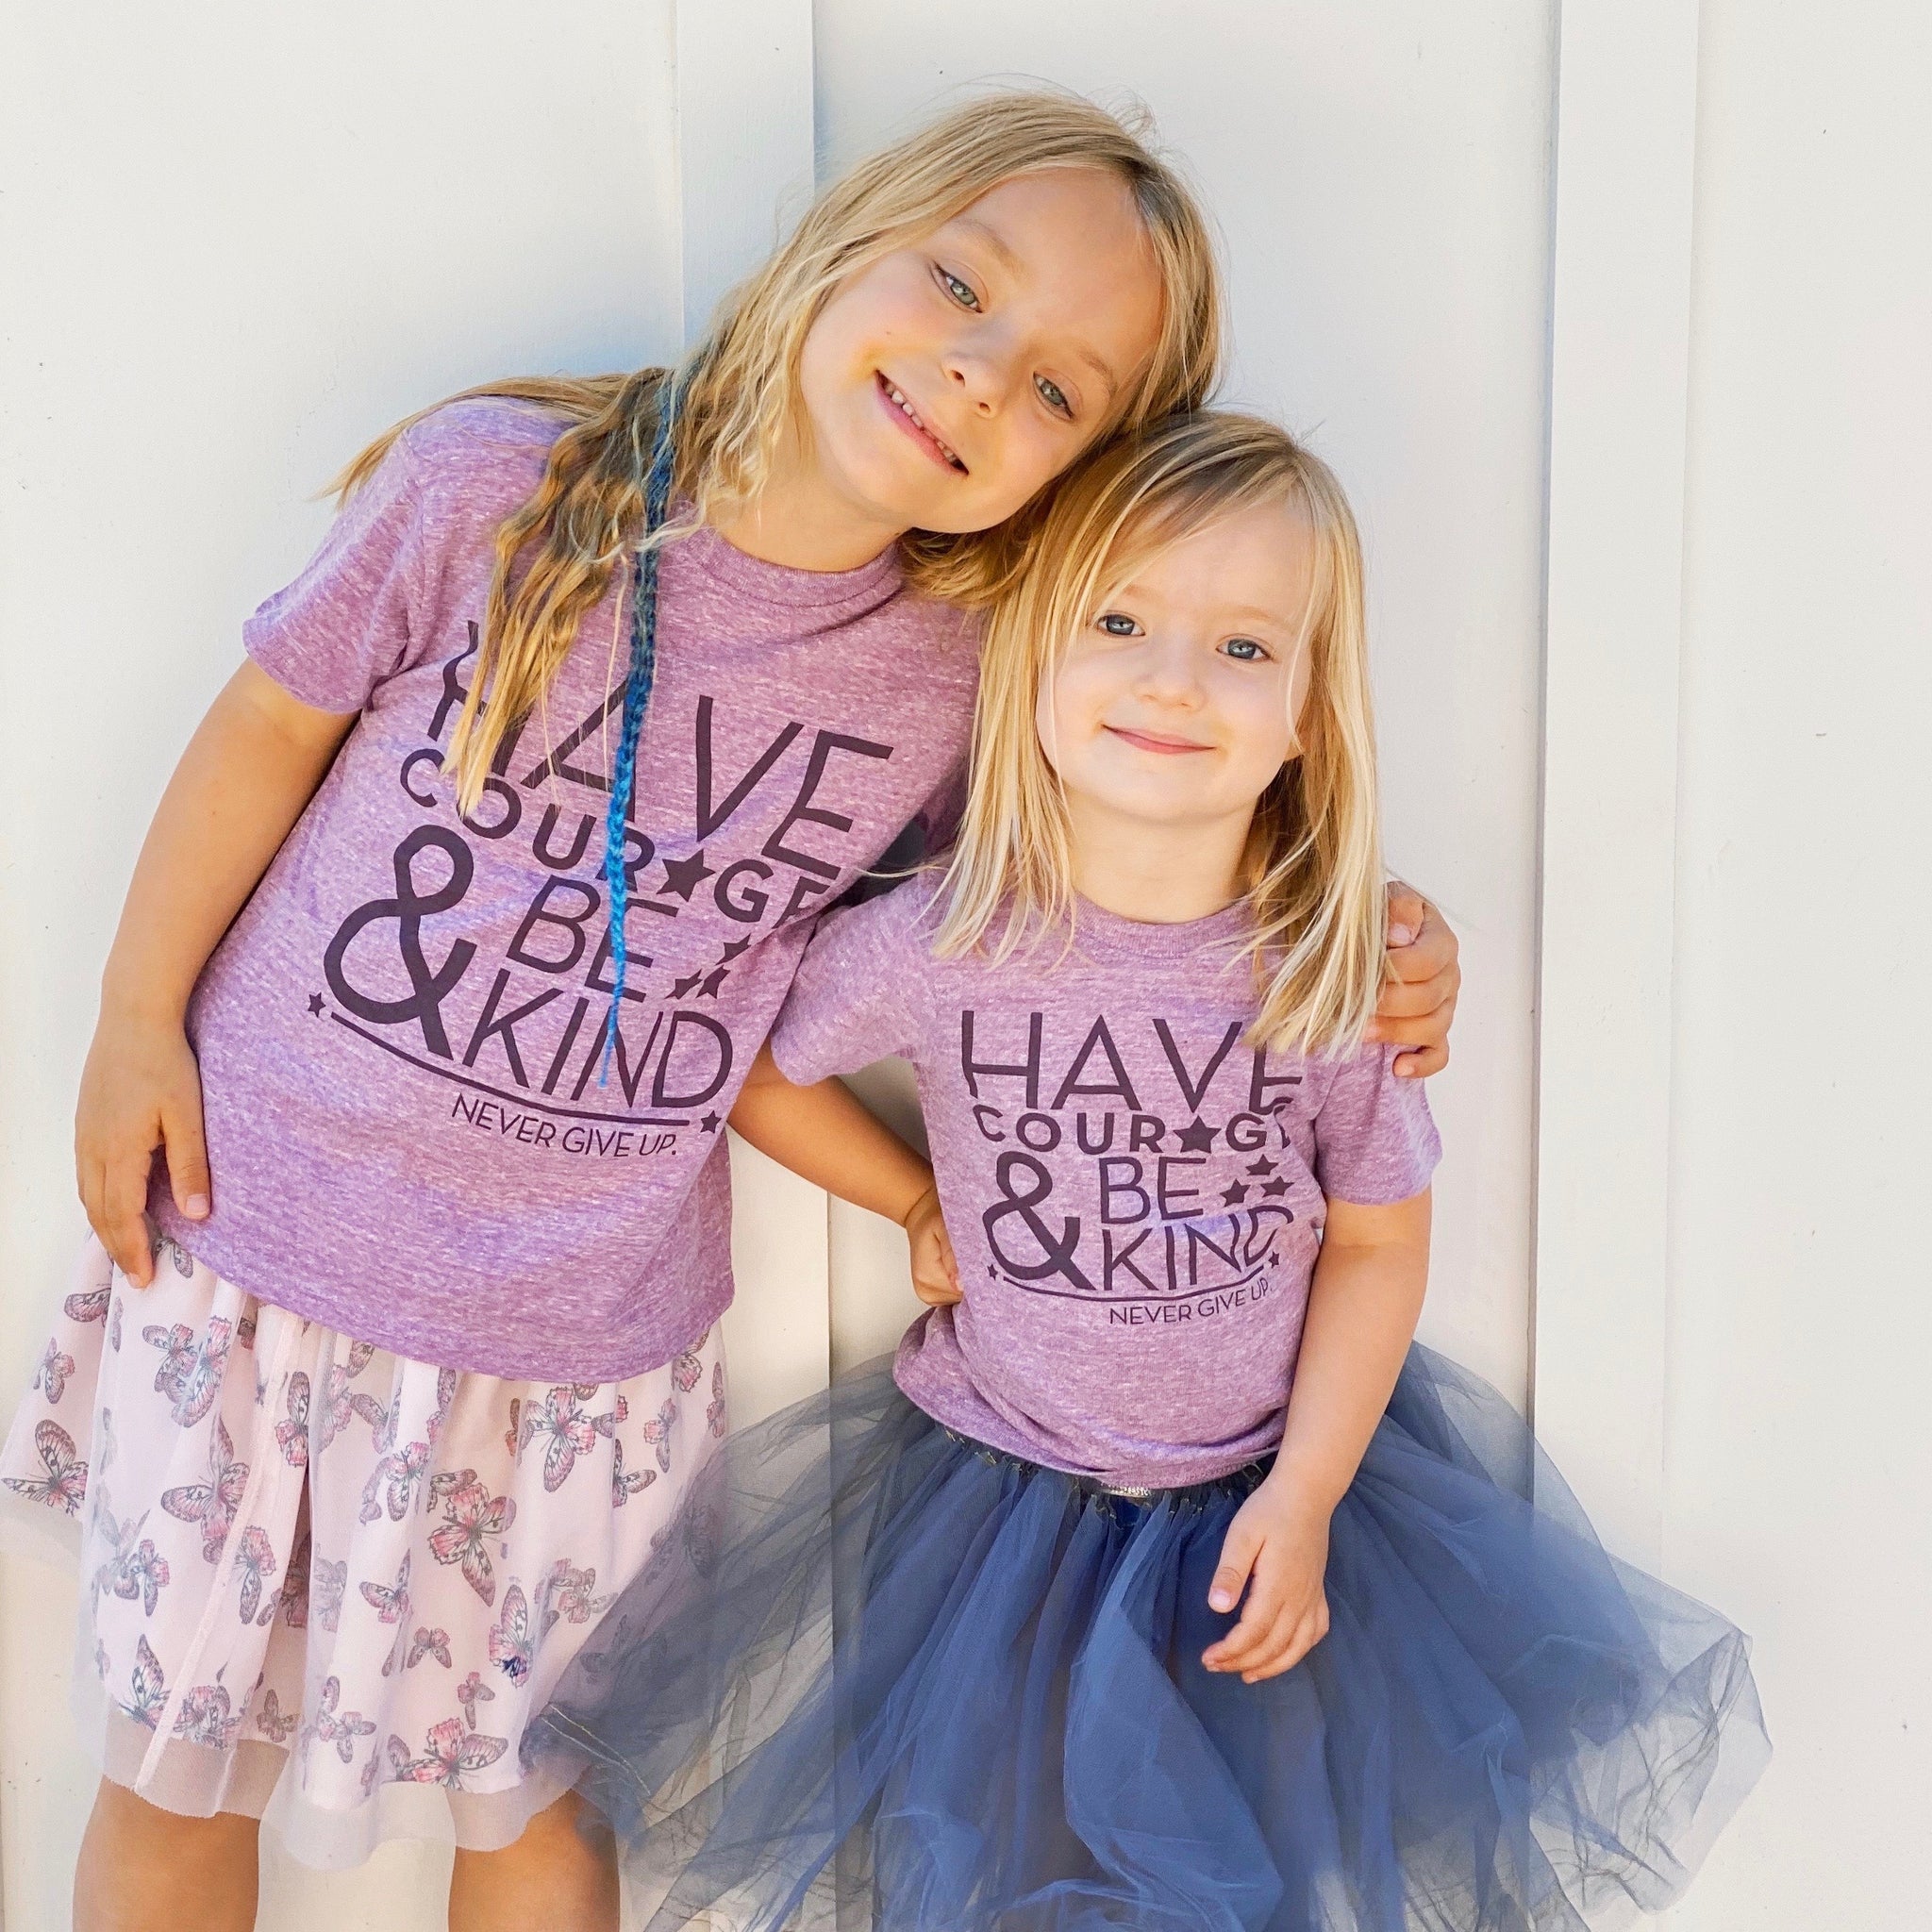 HAVE COURAGE & BE KIND TEE (LILAC)